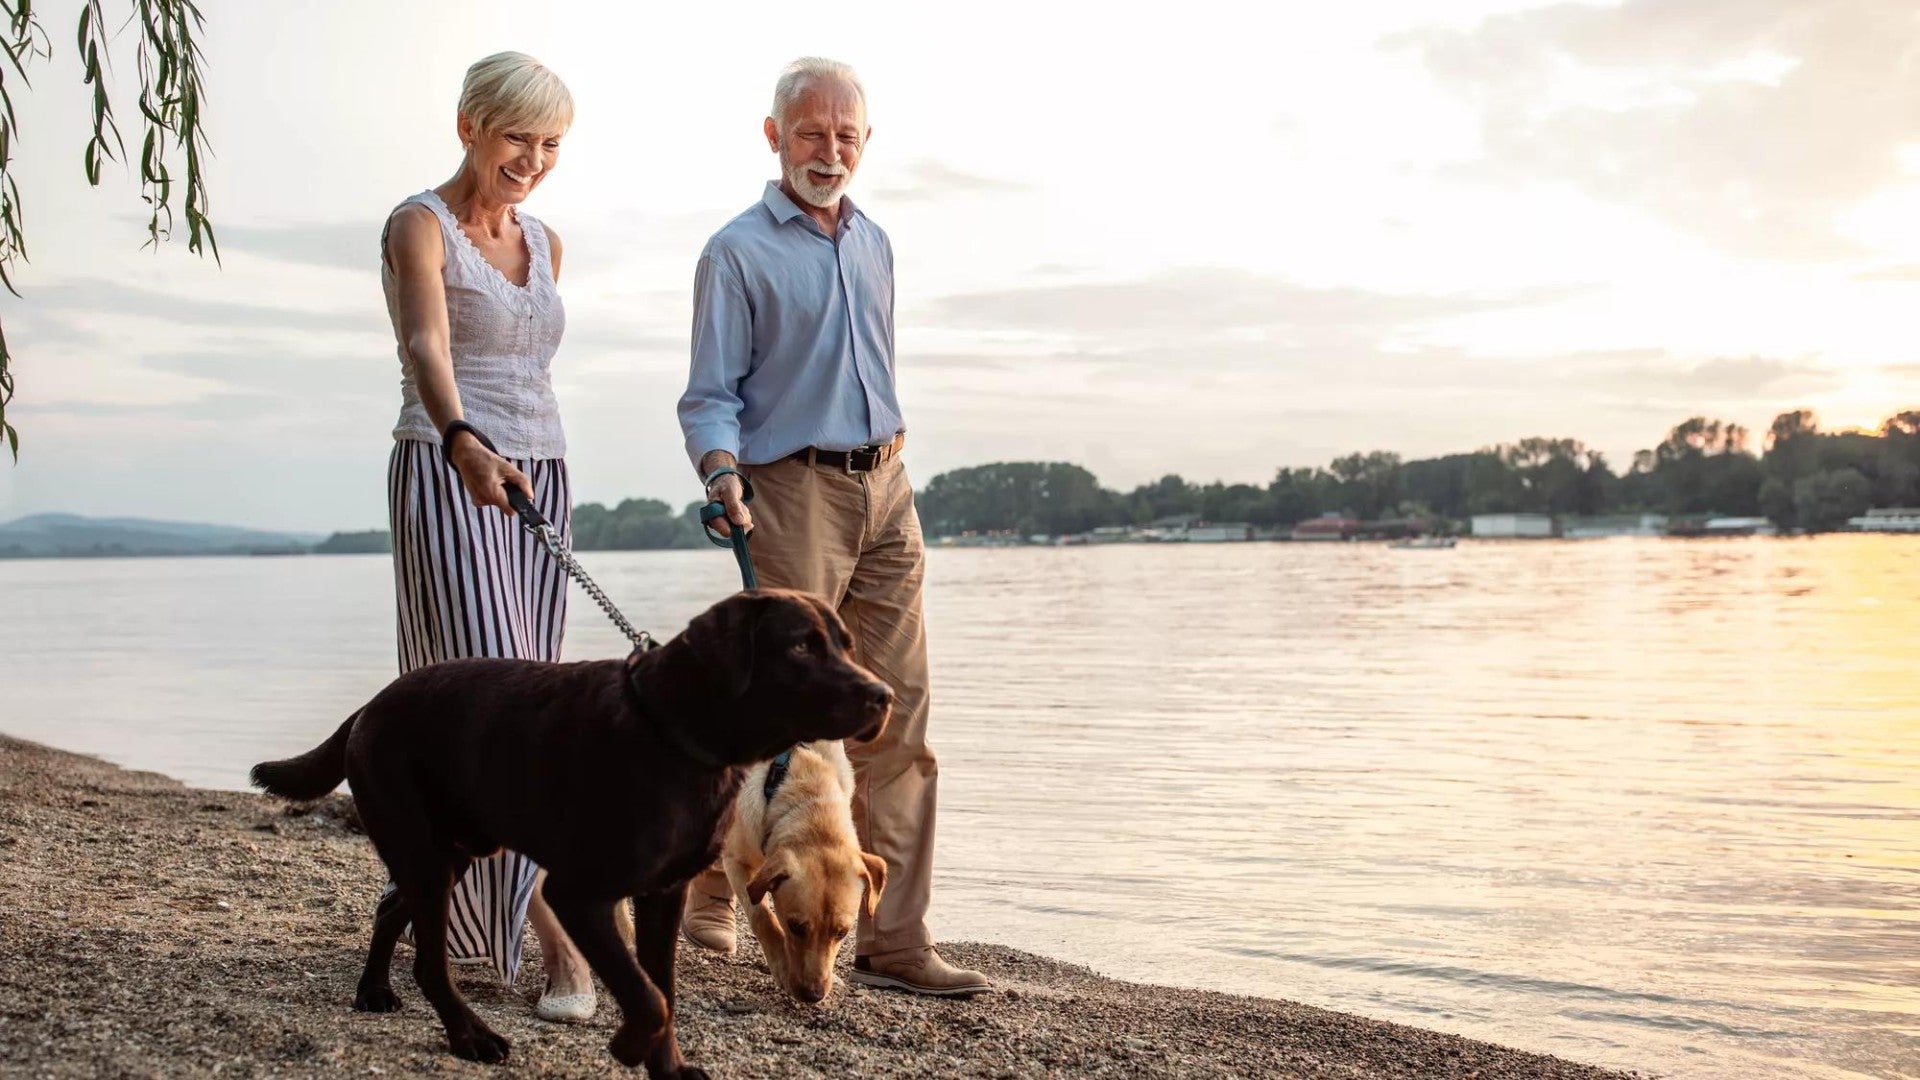 Older man and woman walking two dogs on a beach at sunset